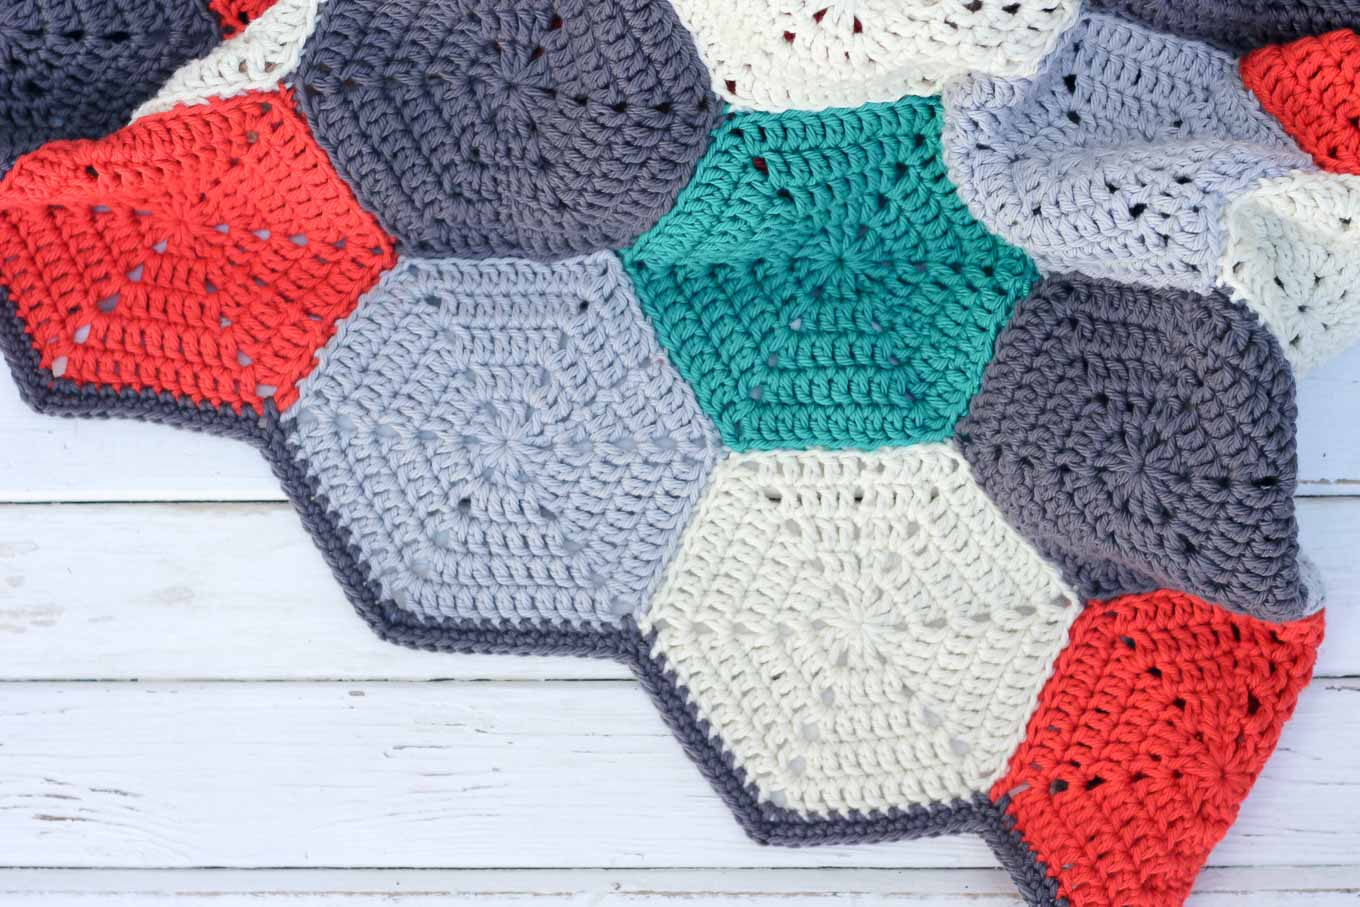 Free Crochet Afghan Patterns For Beginners Happy Hexagons Free Crochet Afghan Pattern Make Do Crew